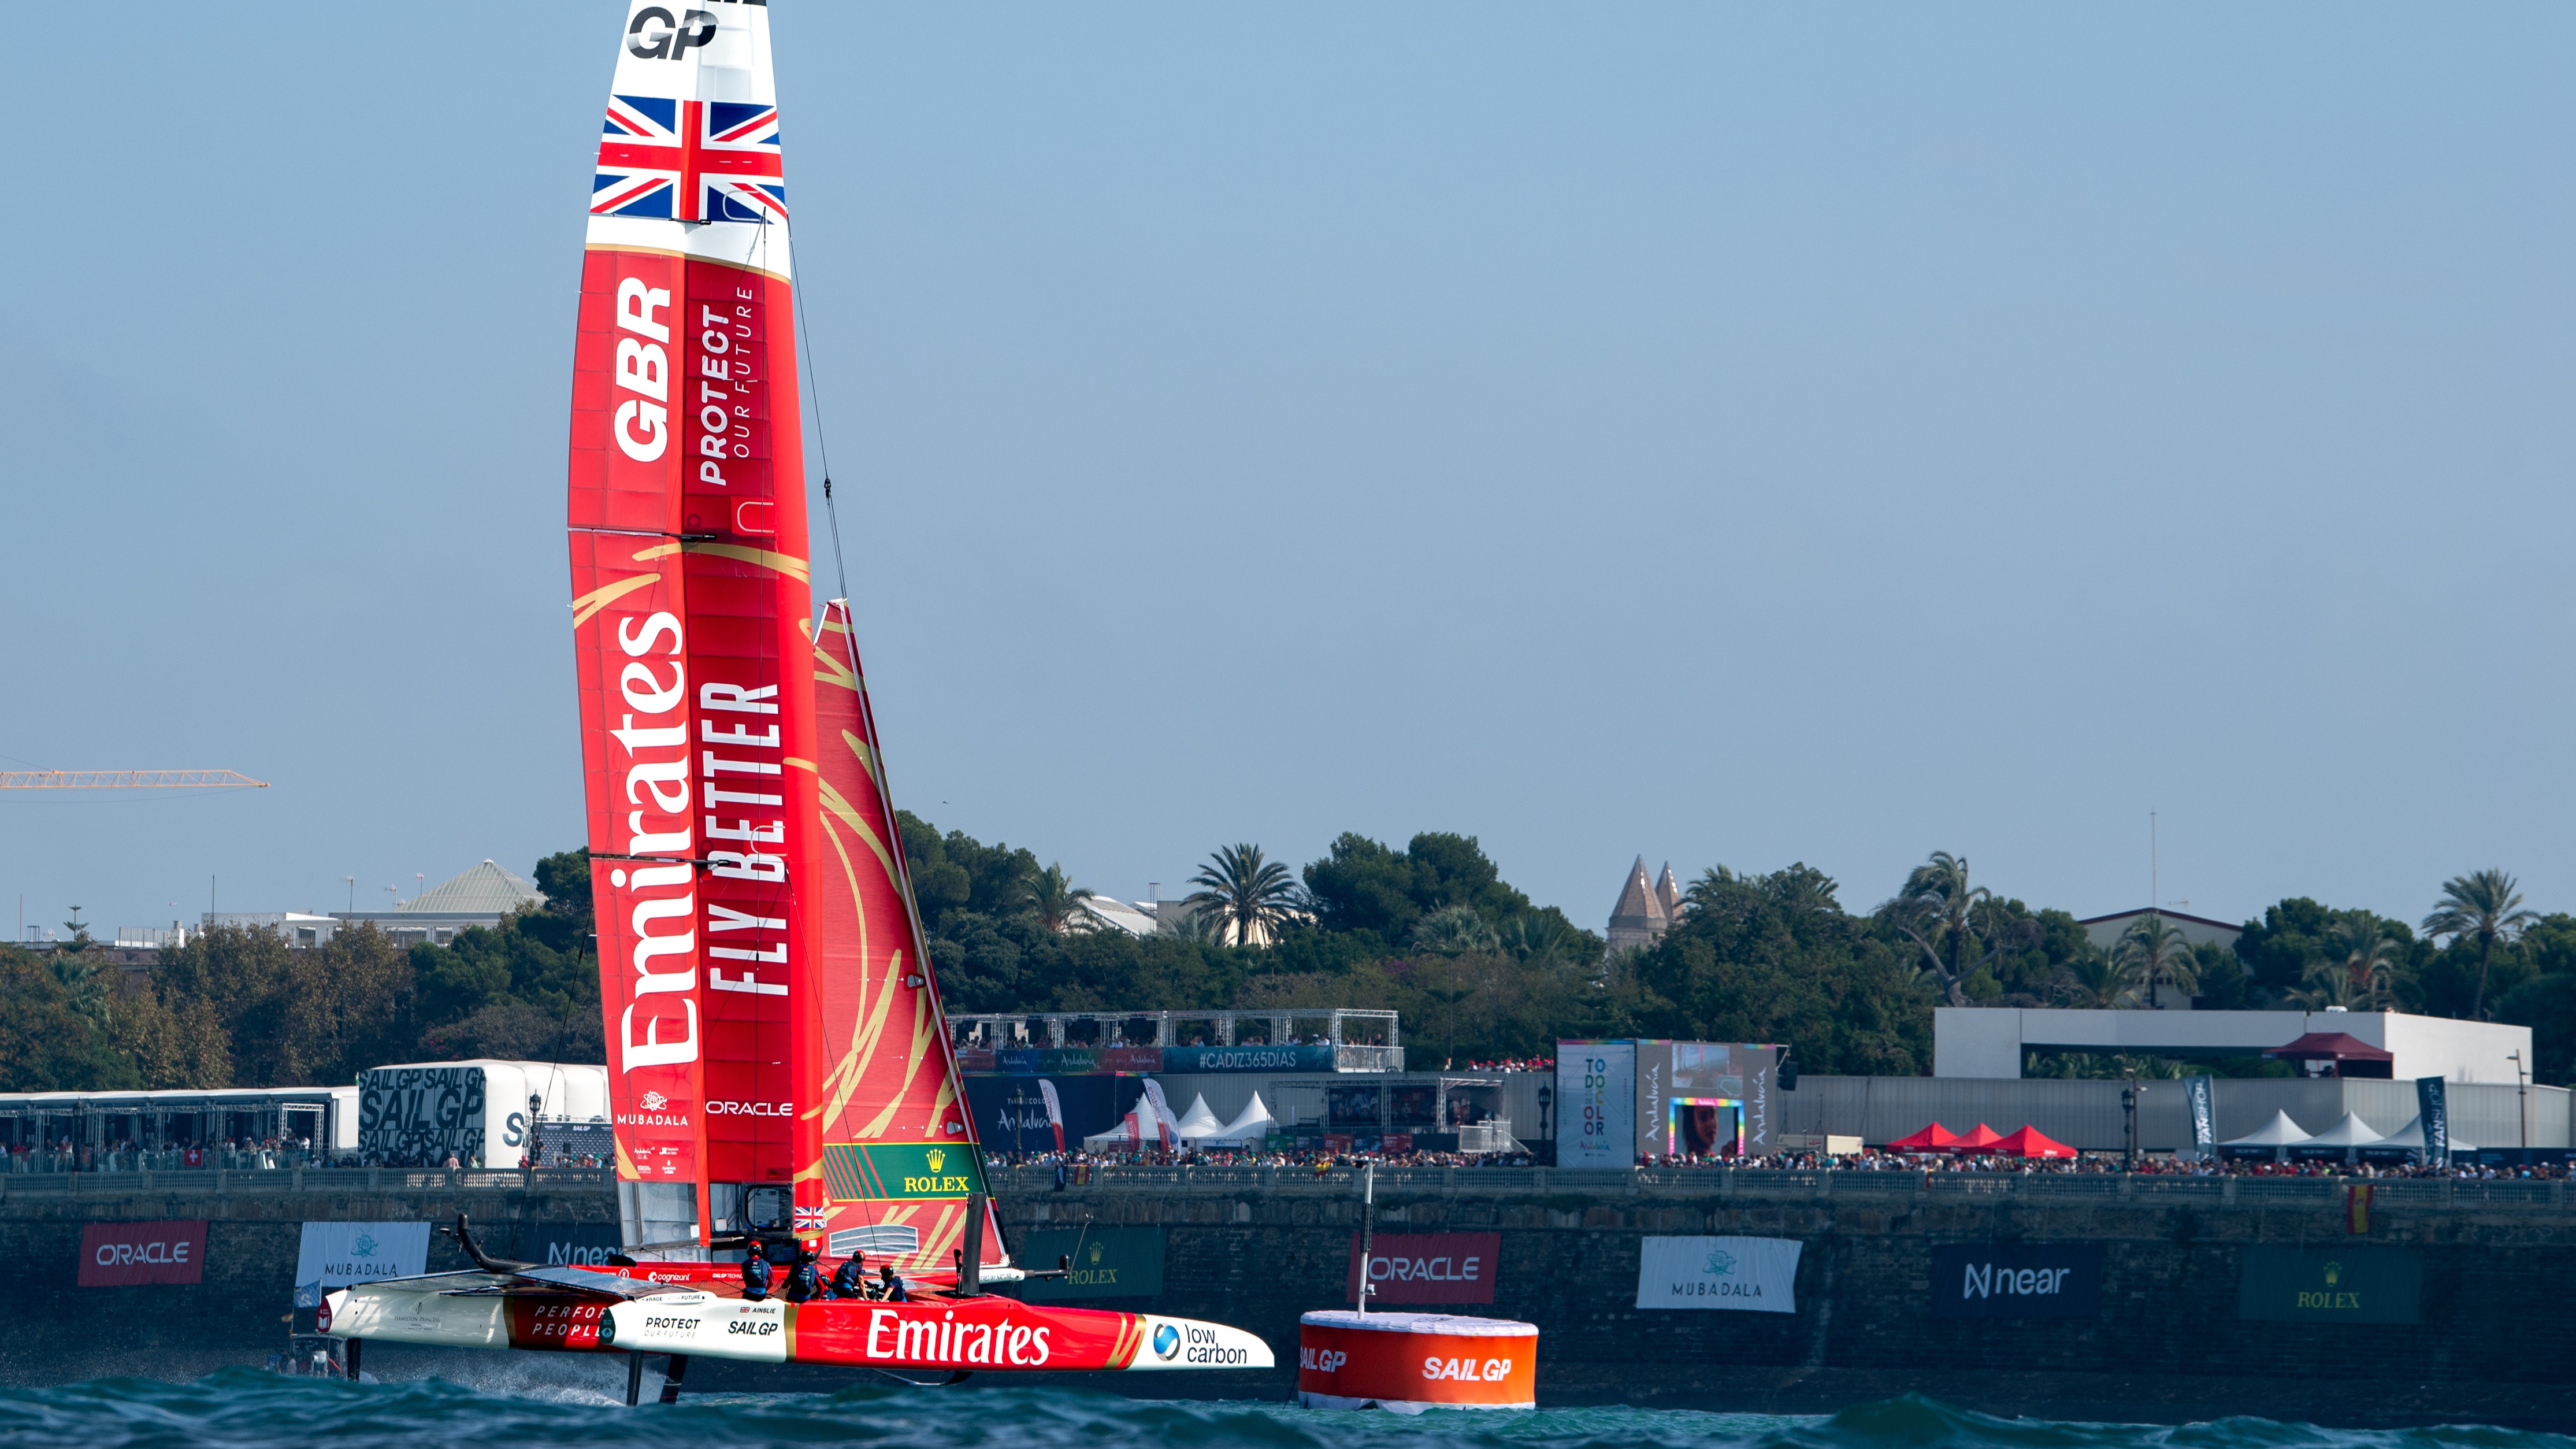 Season 4 // Emirates GBR on first day of racing in Cadiz, Spain